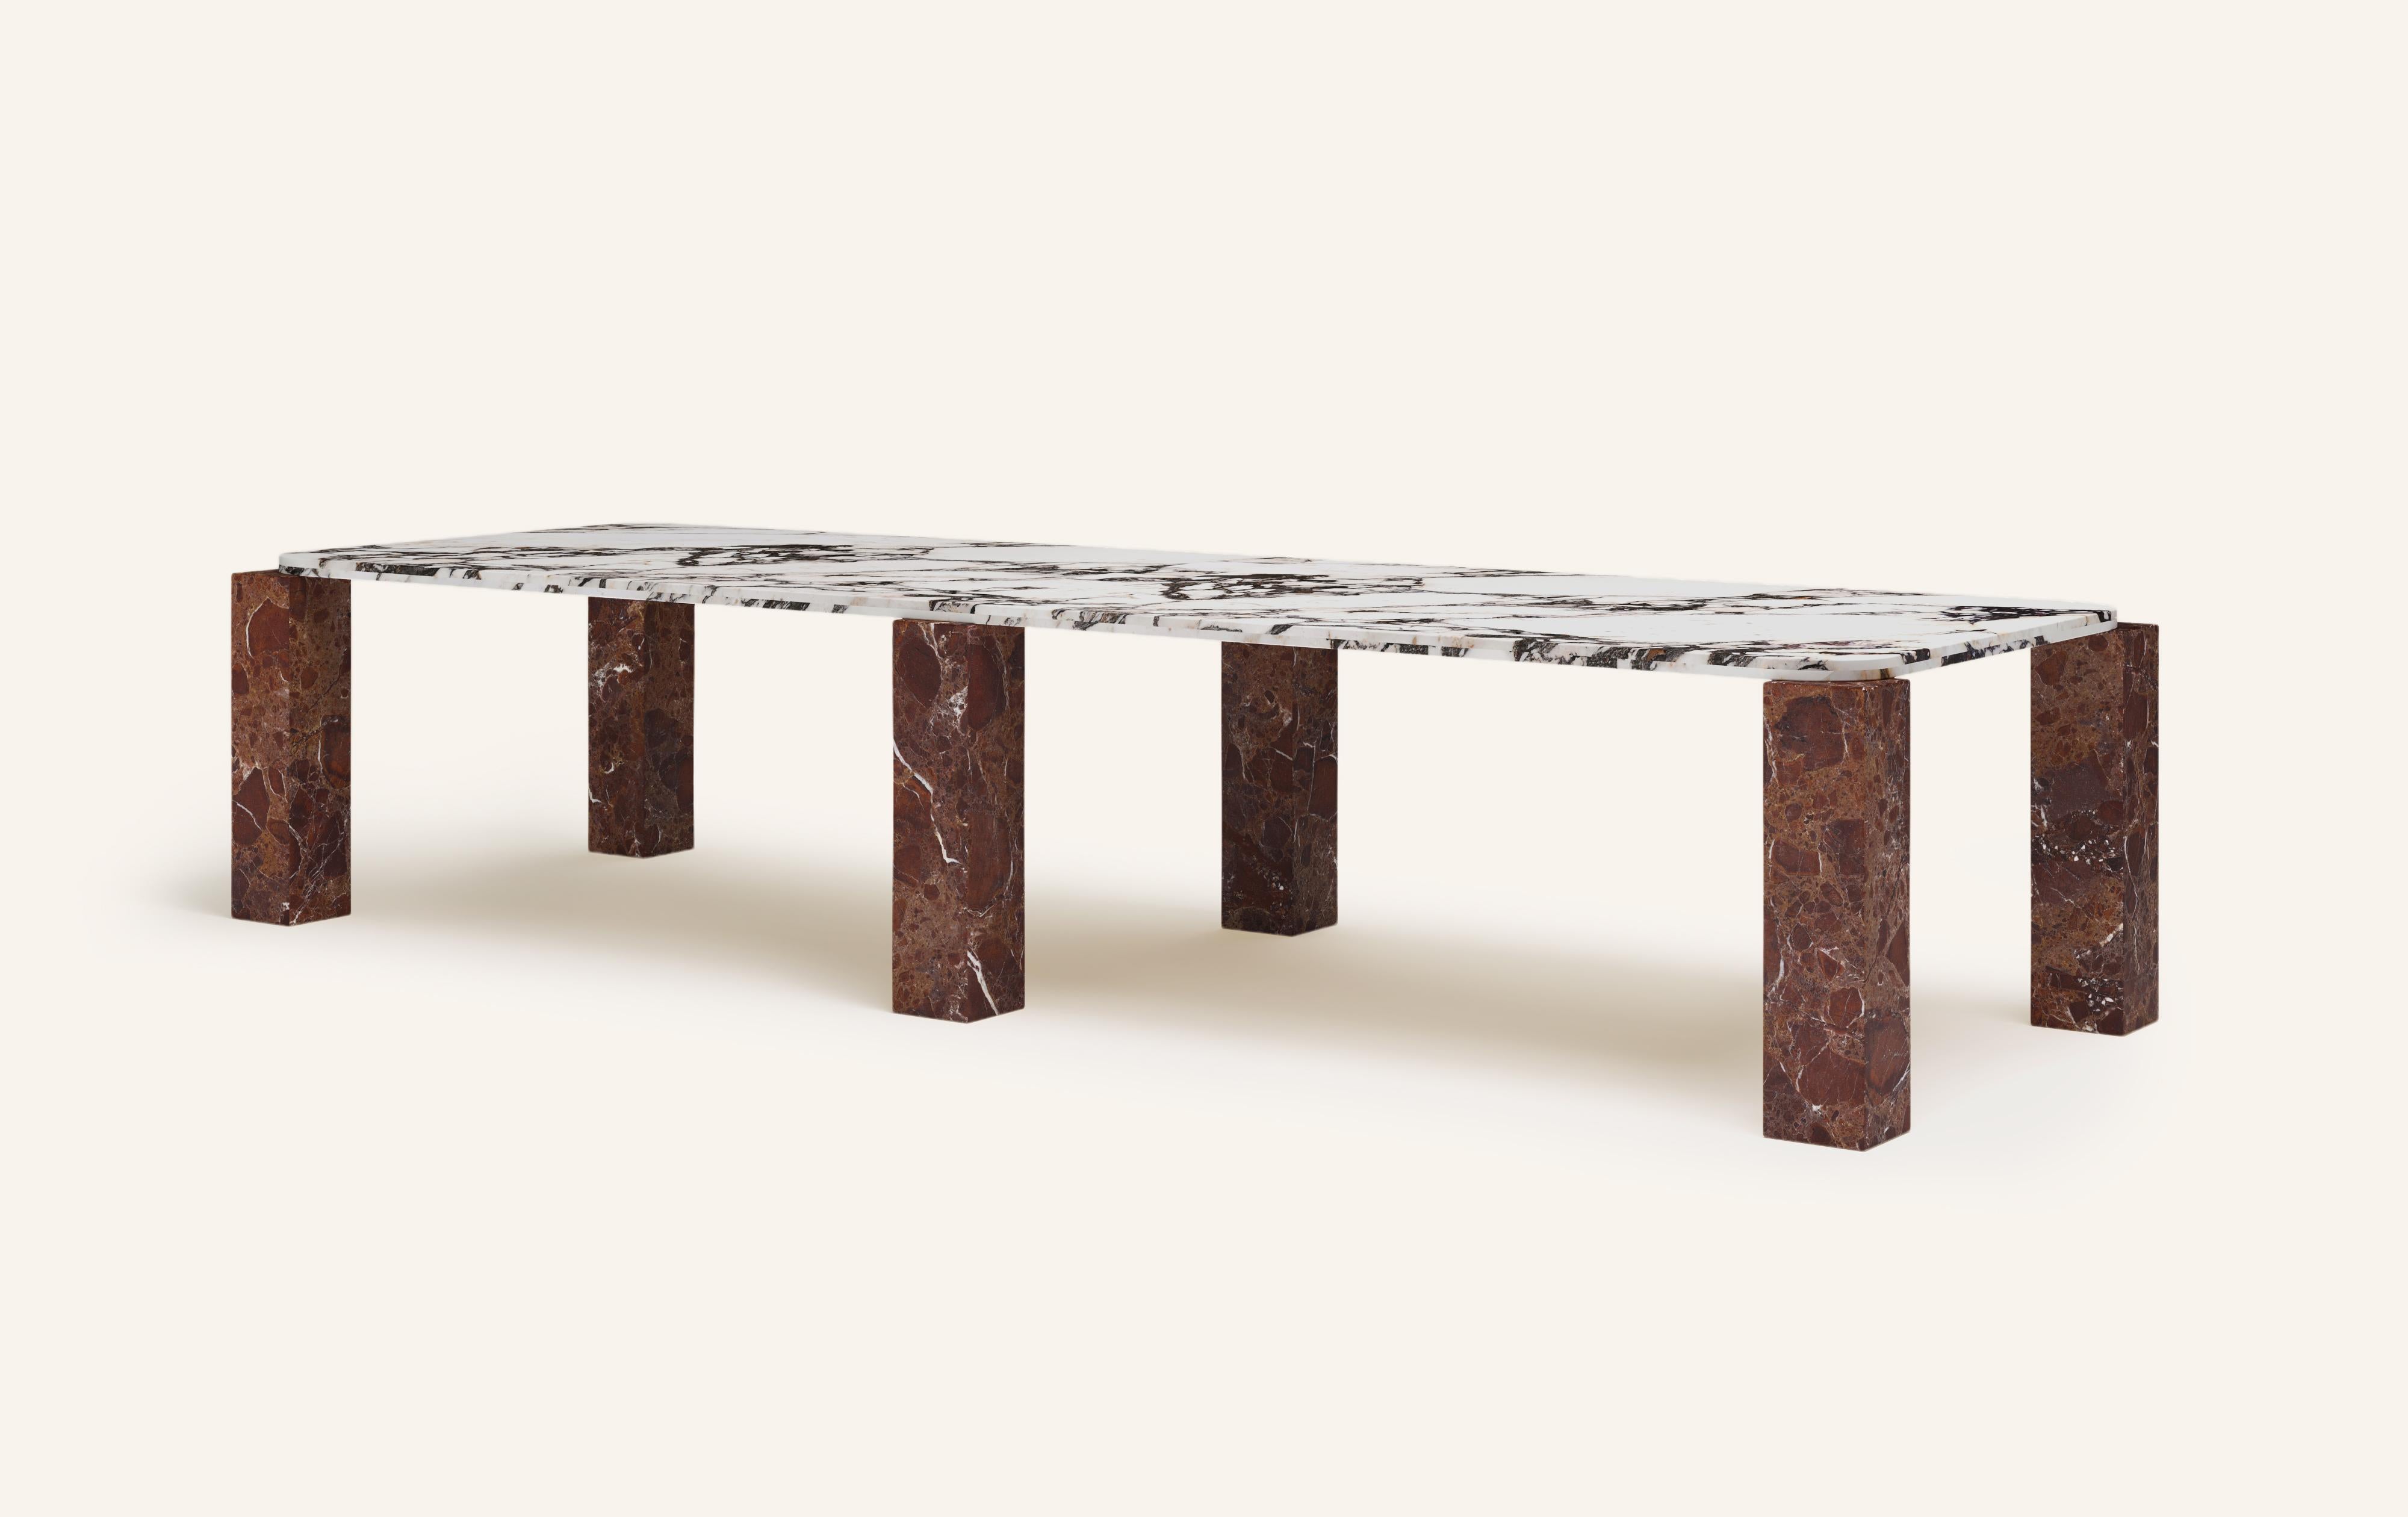 Organic Modern FORM(LA) Cubo Rectangle Dining Table 146”L x 50”W x 30”H Viola & Rosso Marble For Sale